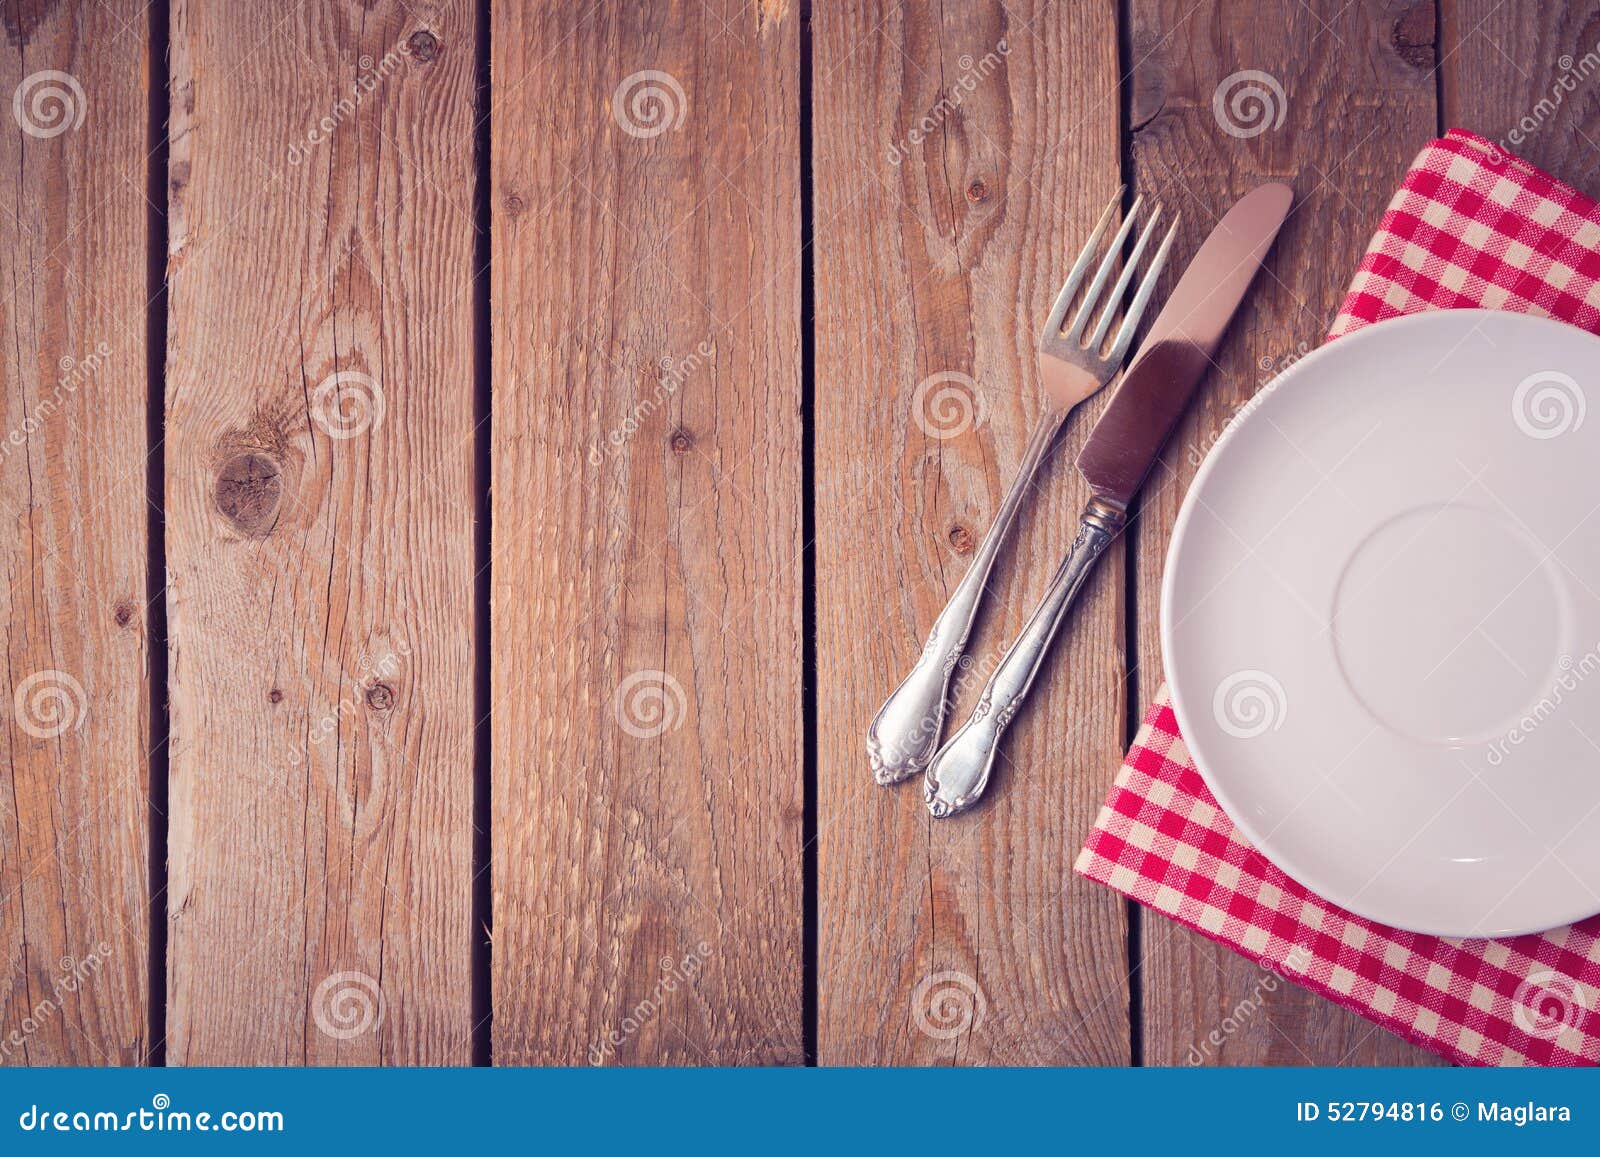 Background With Empty Plate On Wooden Table. View From 